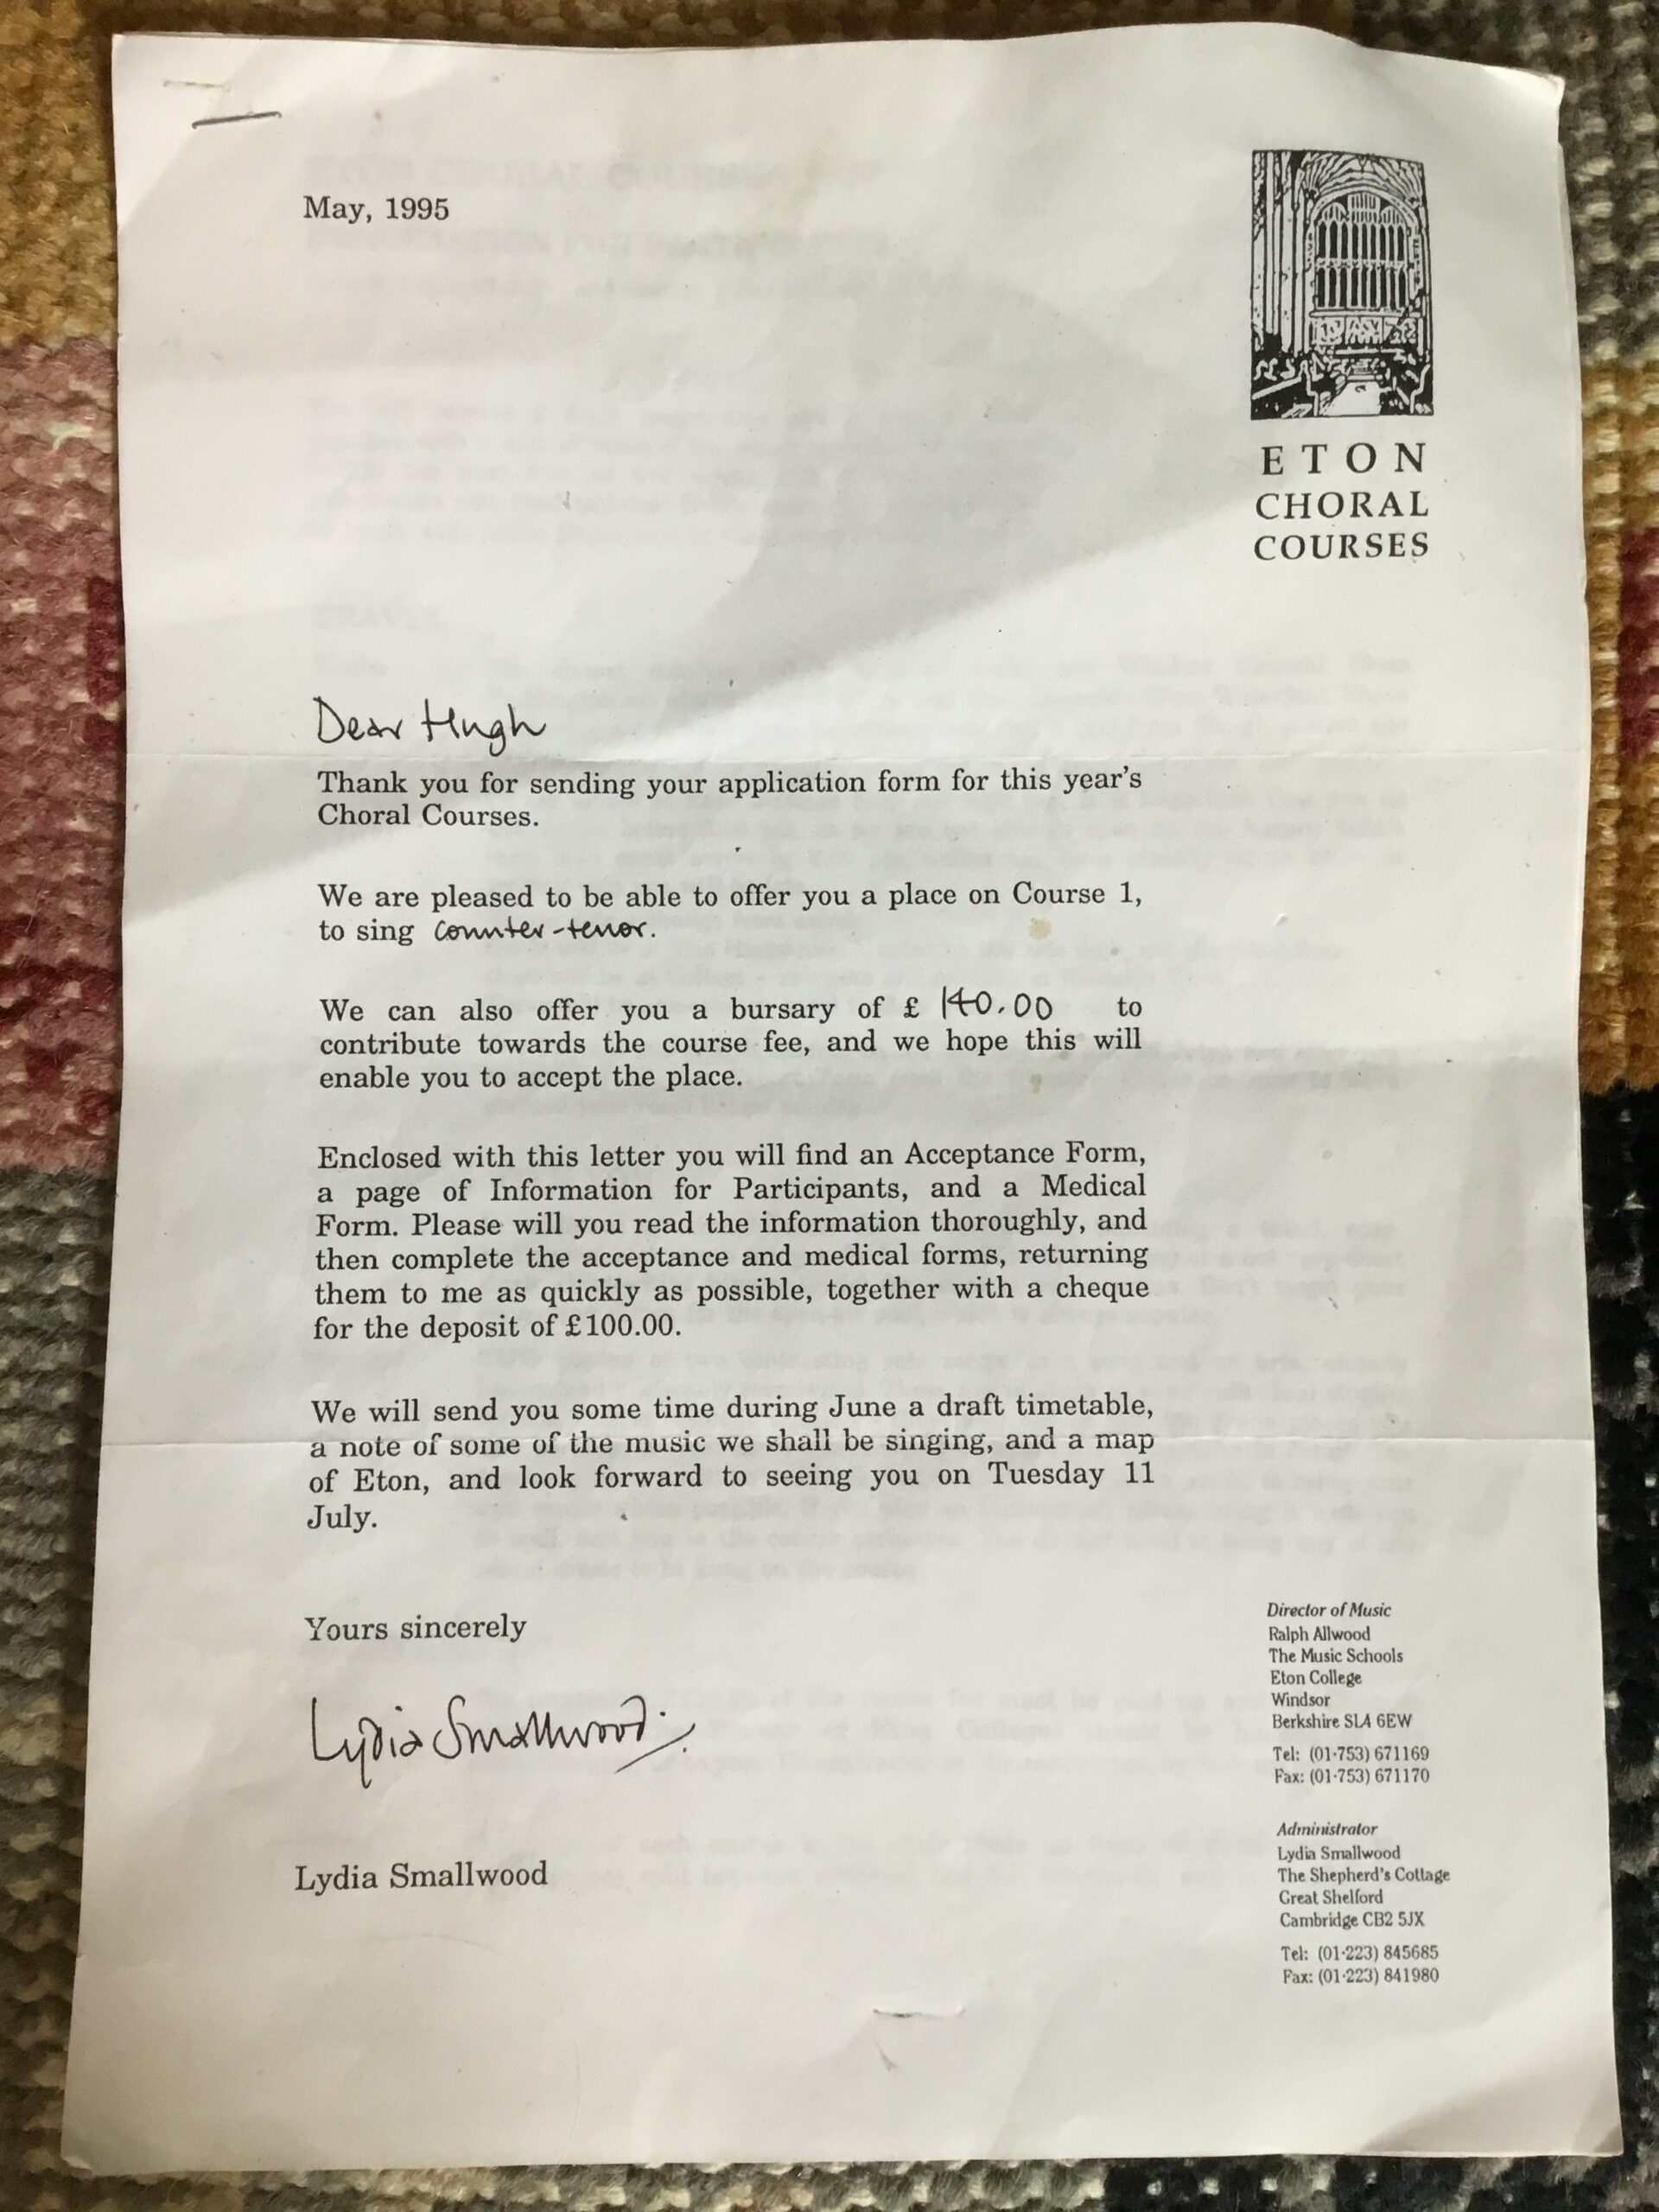 Acceptance Letter Choral Course 1 1995 and Bursary